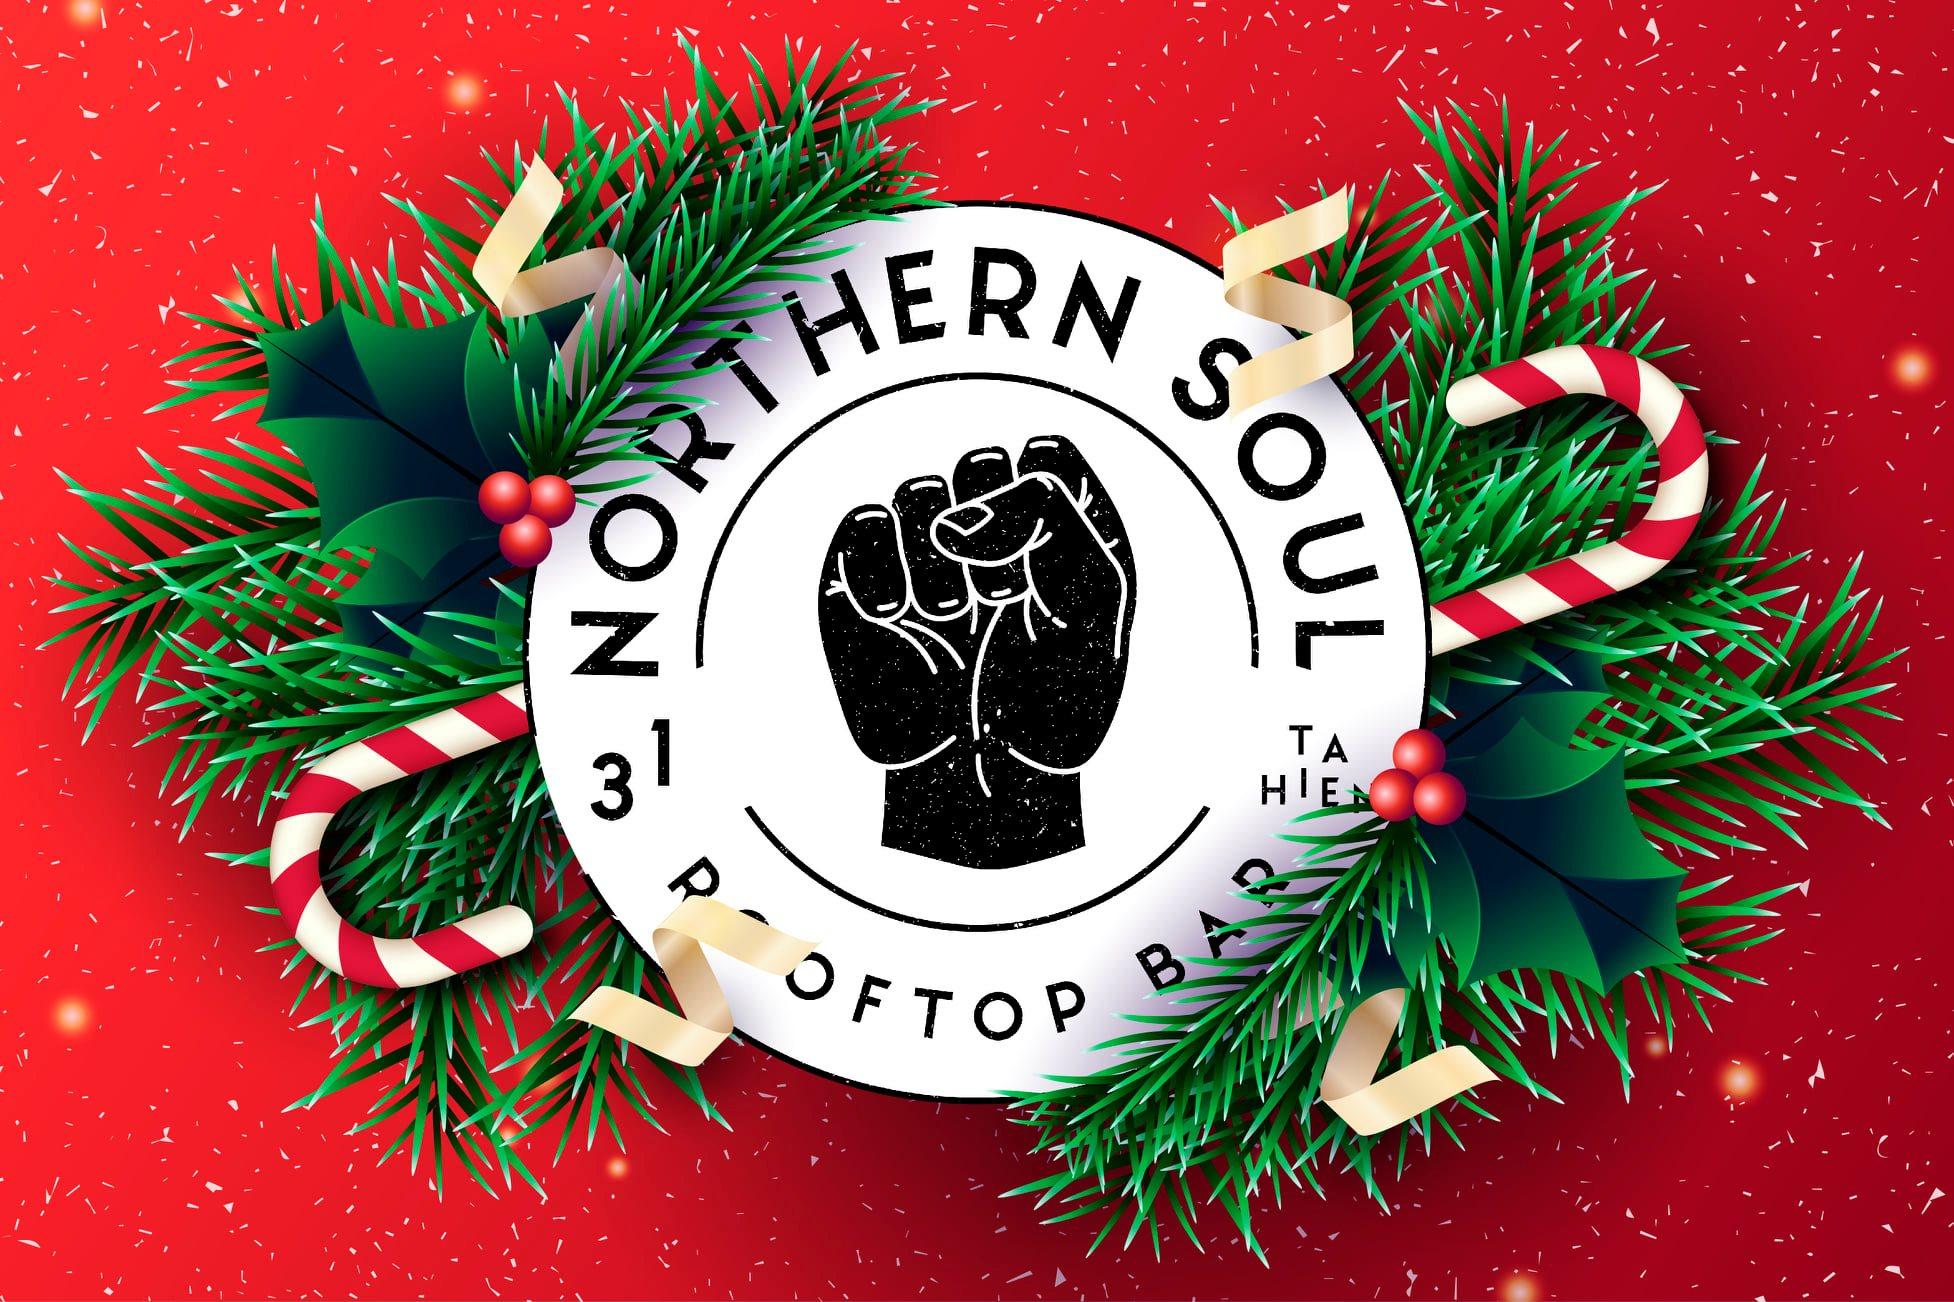 Northern Soul Rooftop Bar From All Of Us At We